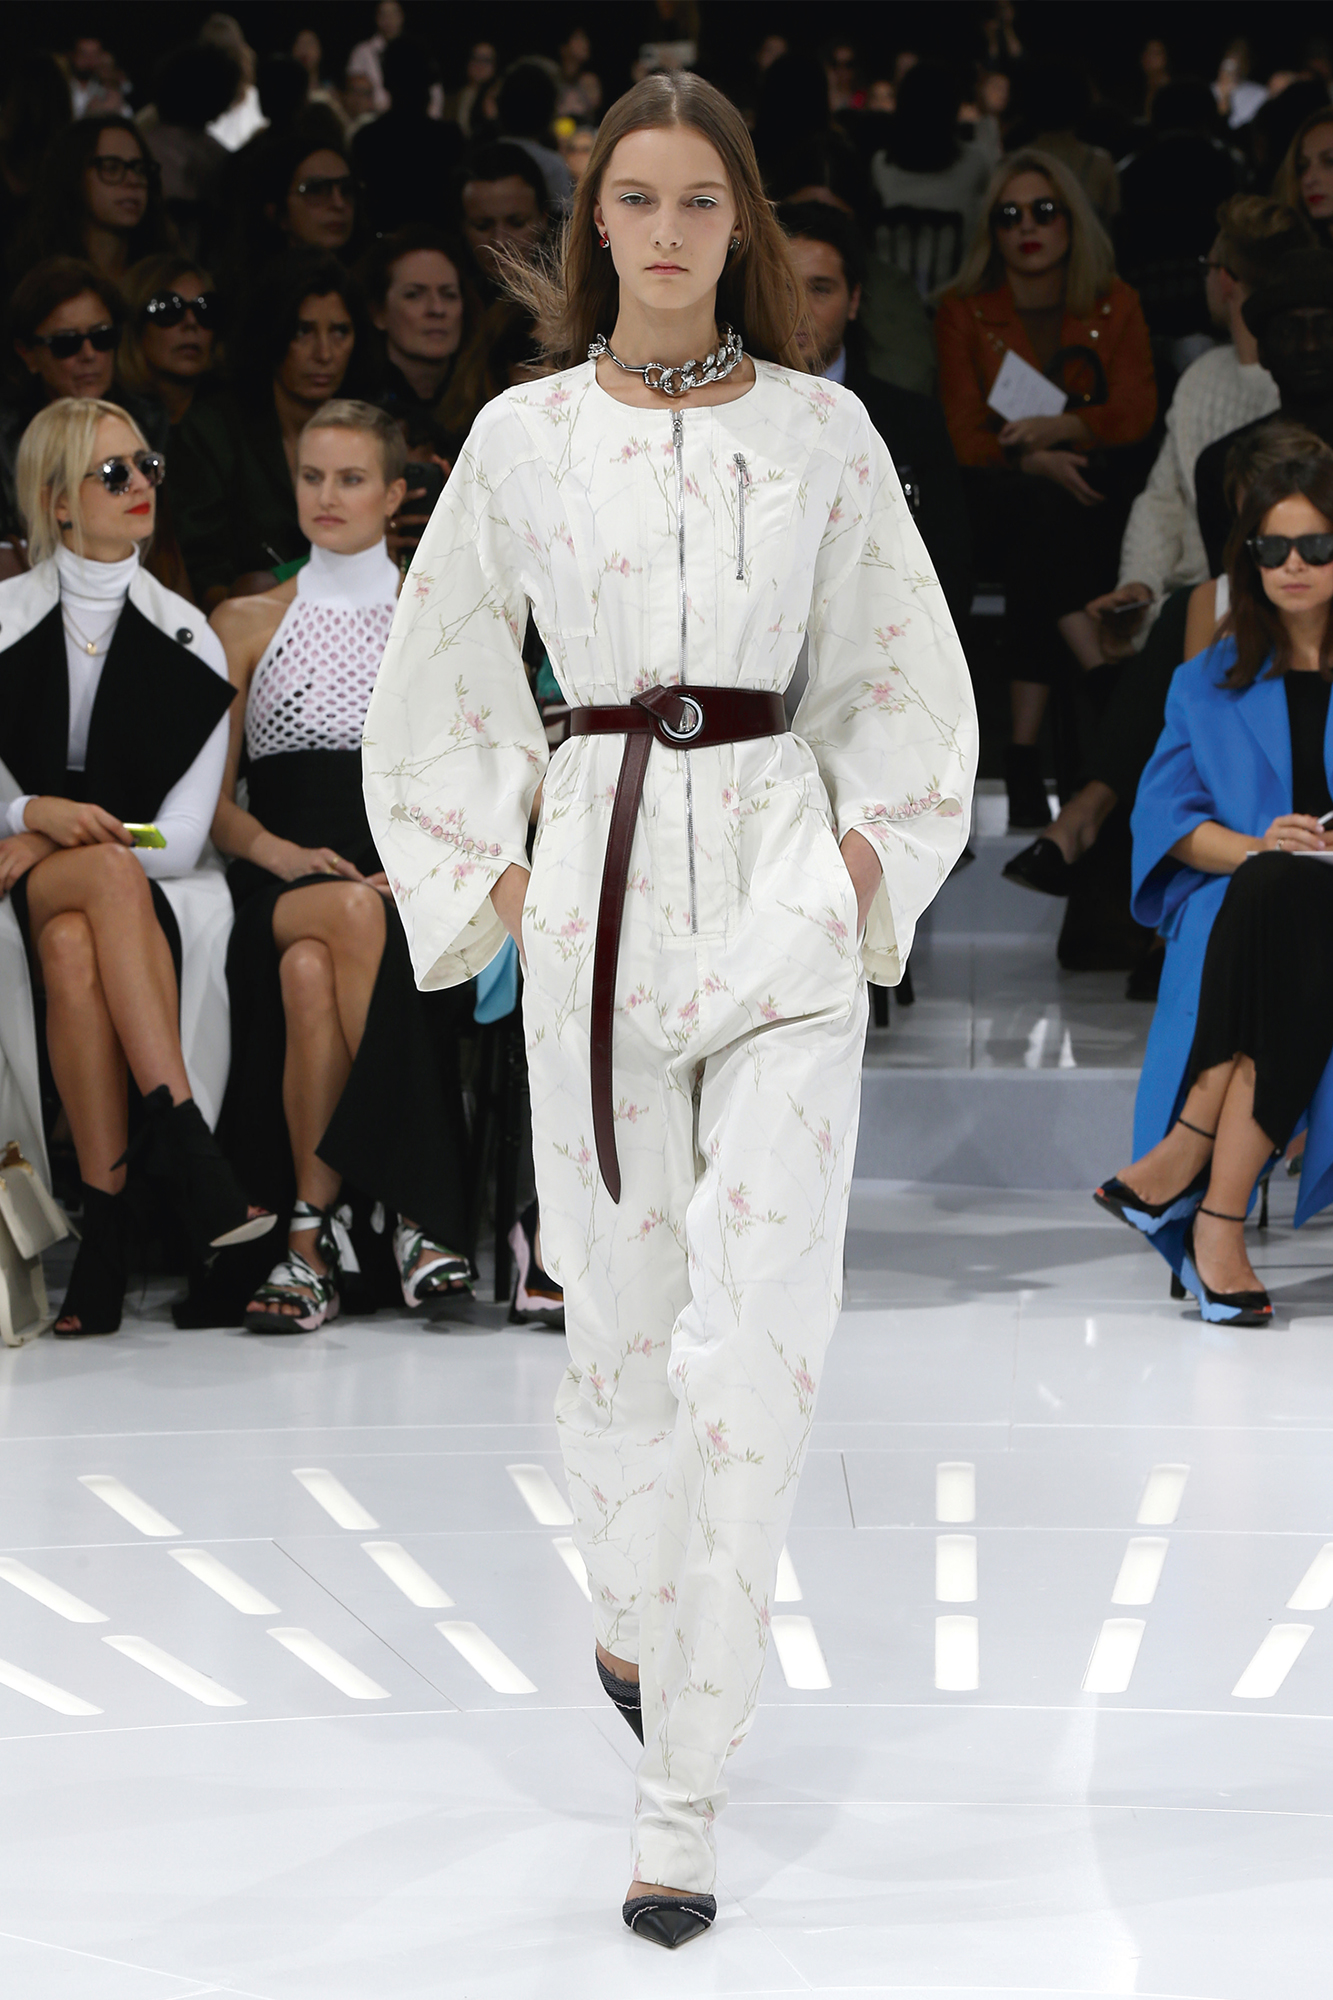 Christian Dior Haute Couture Spring-Summer Ready To Wear Dresses & Accessories Collection 2015-16 (19)